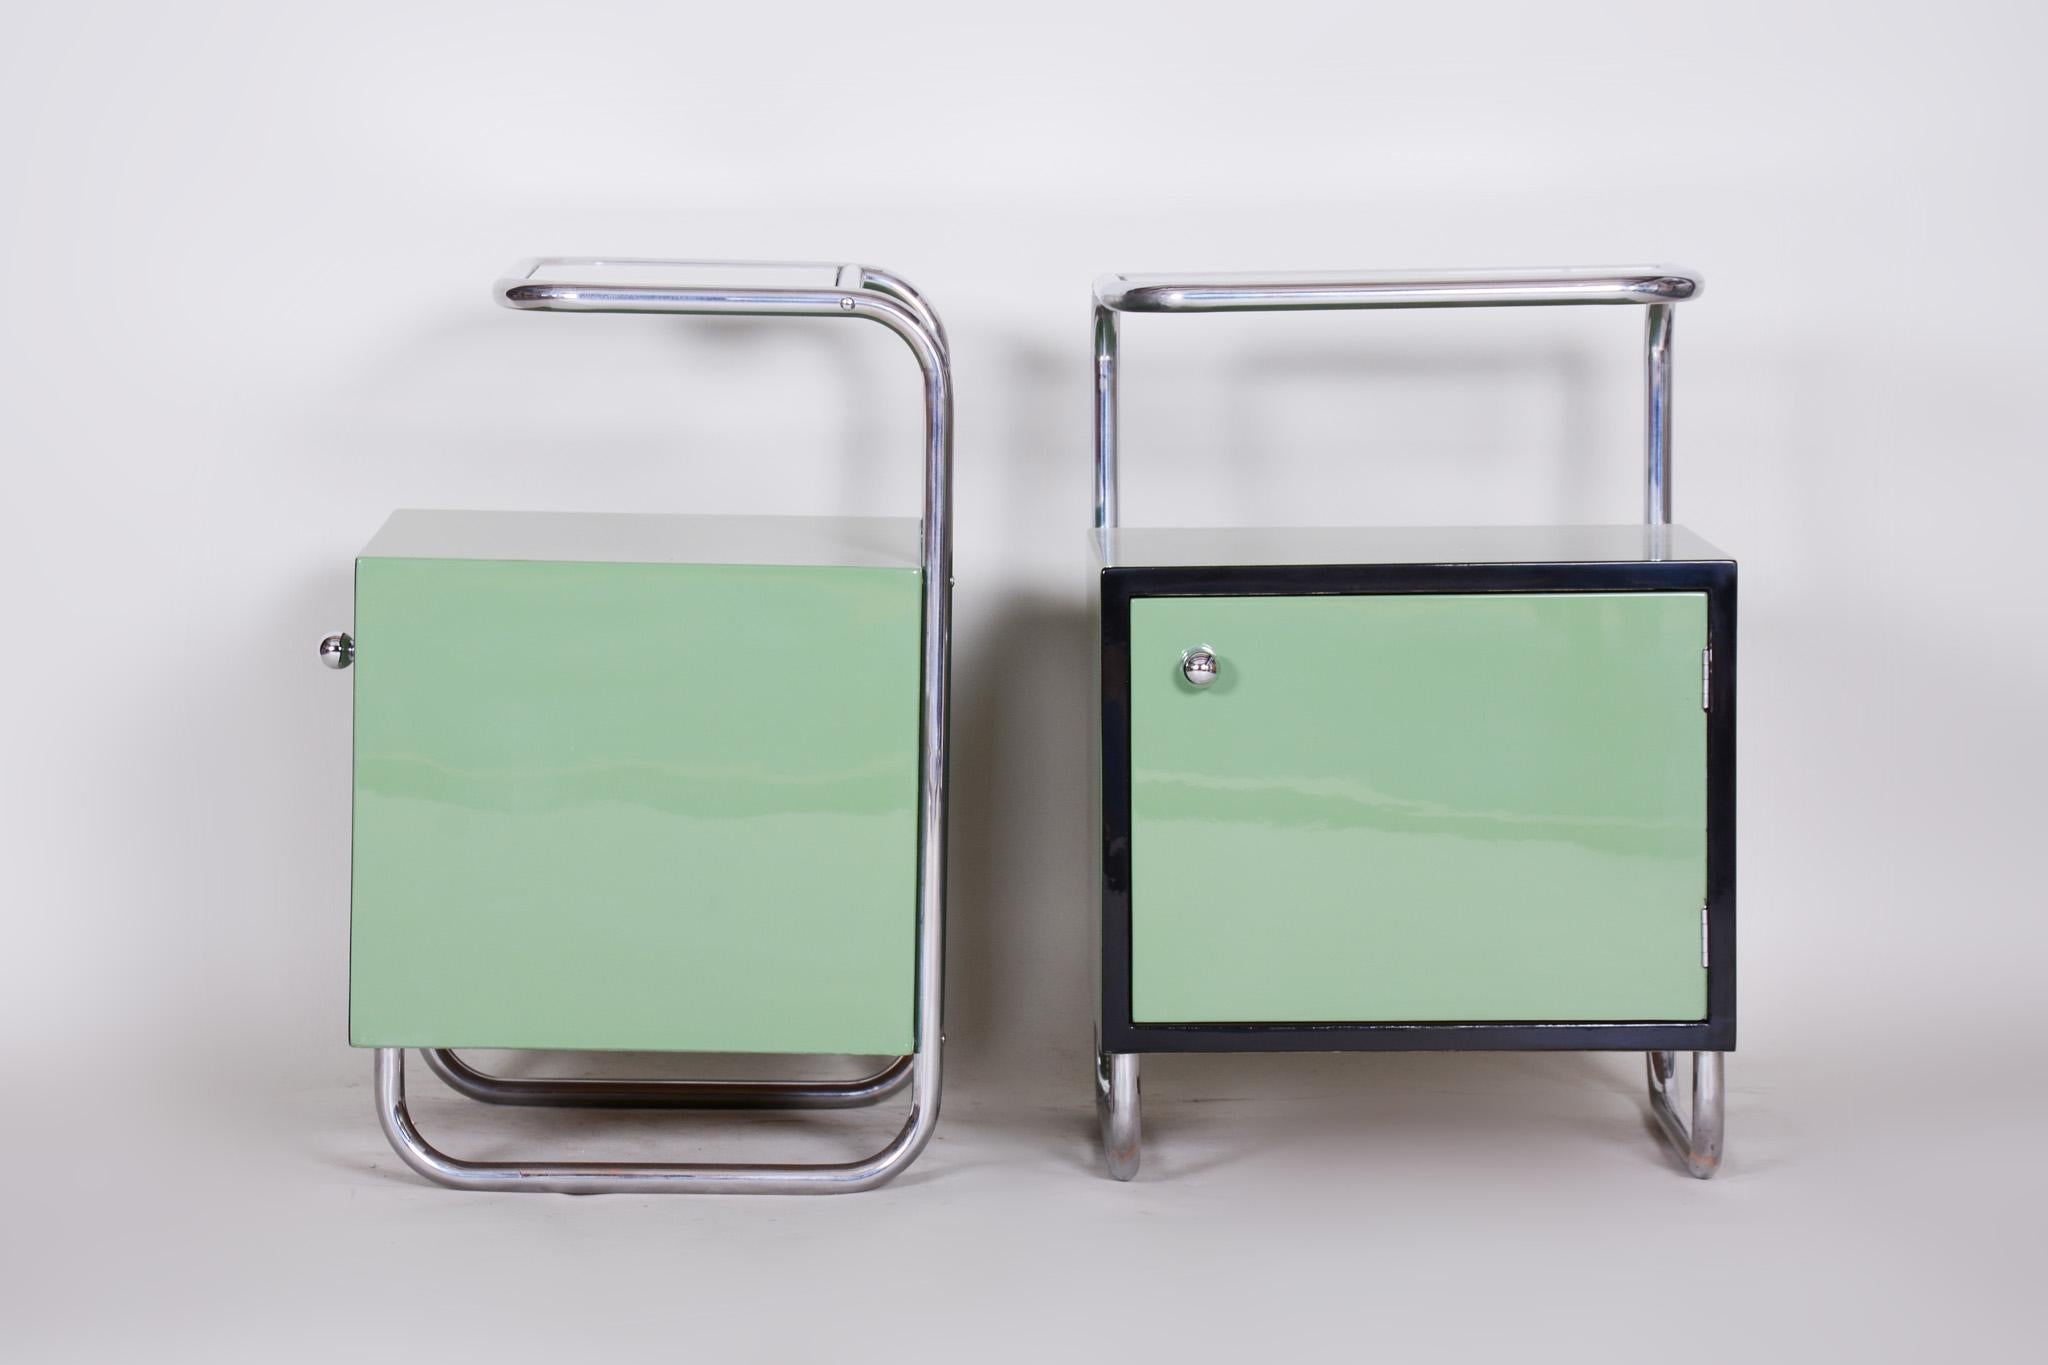 Pair of Green Vintage Bauhaus Bed Side Tables, Vichr, 1930s Glass Removable Desk 3